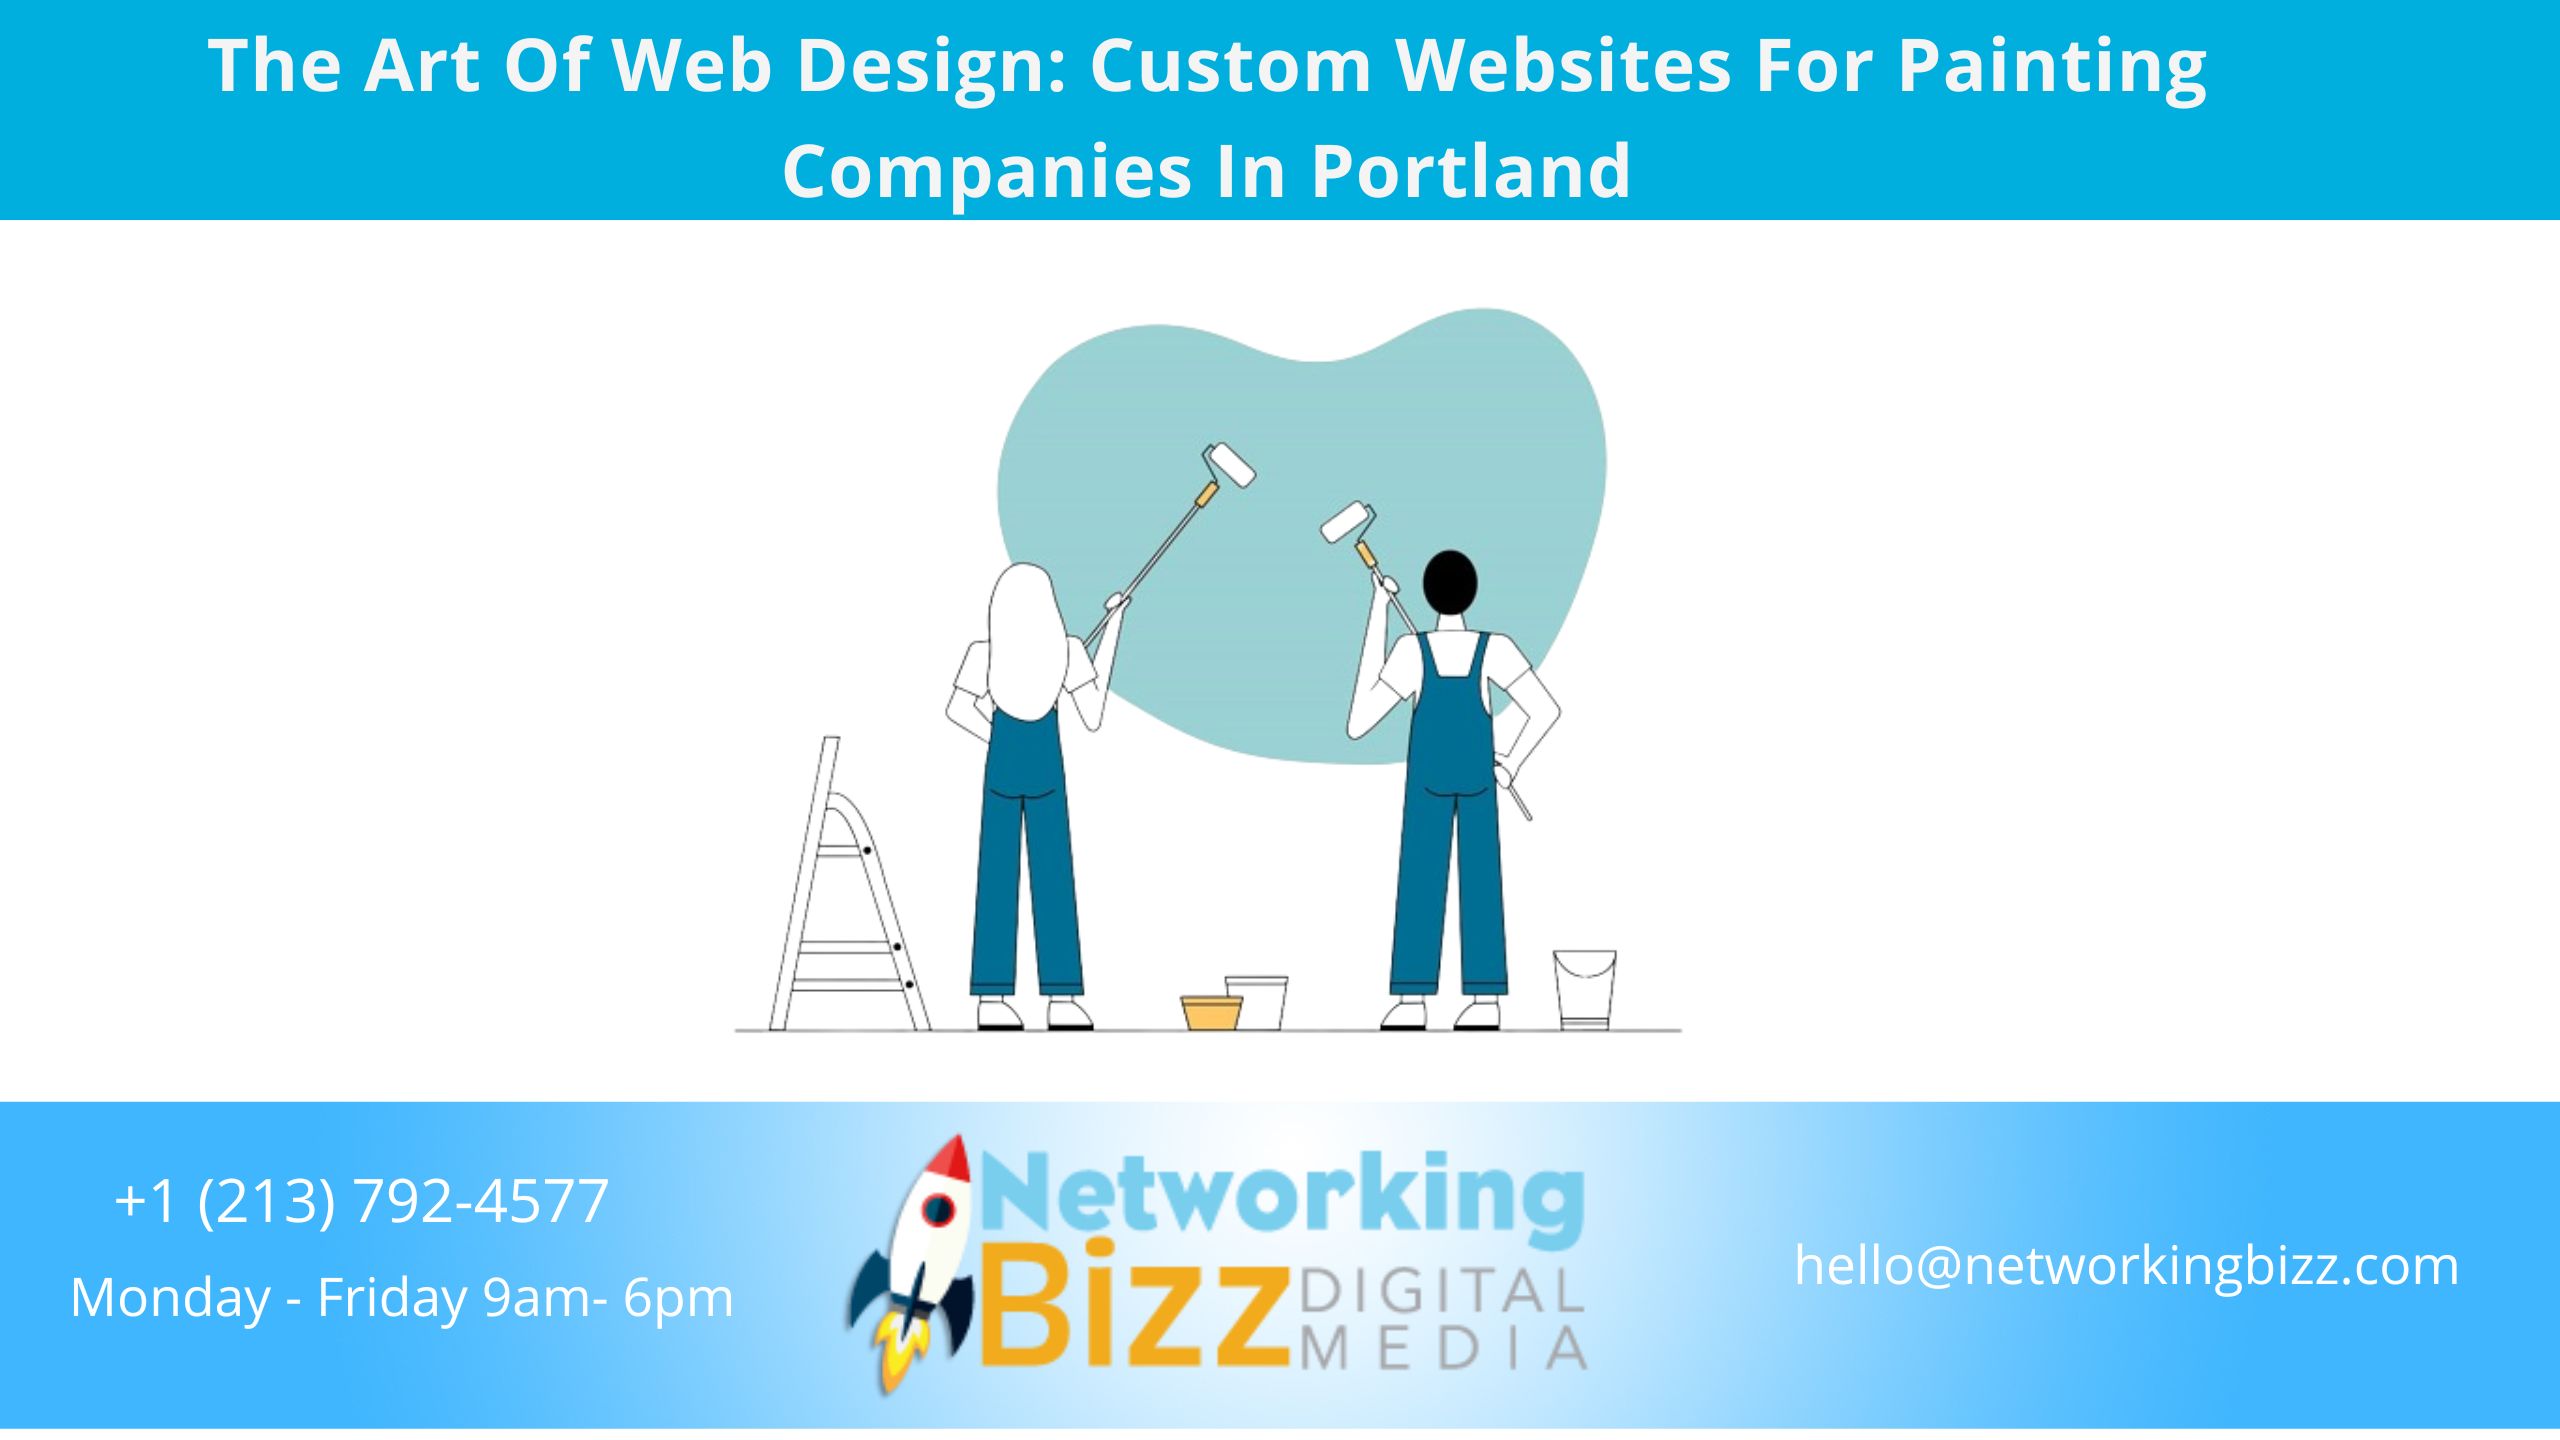 The Art Of Web Design: Custom Websites For Painting Companies In Portland